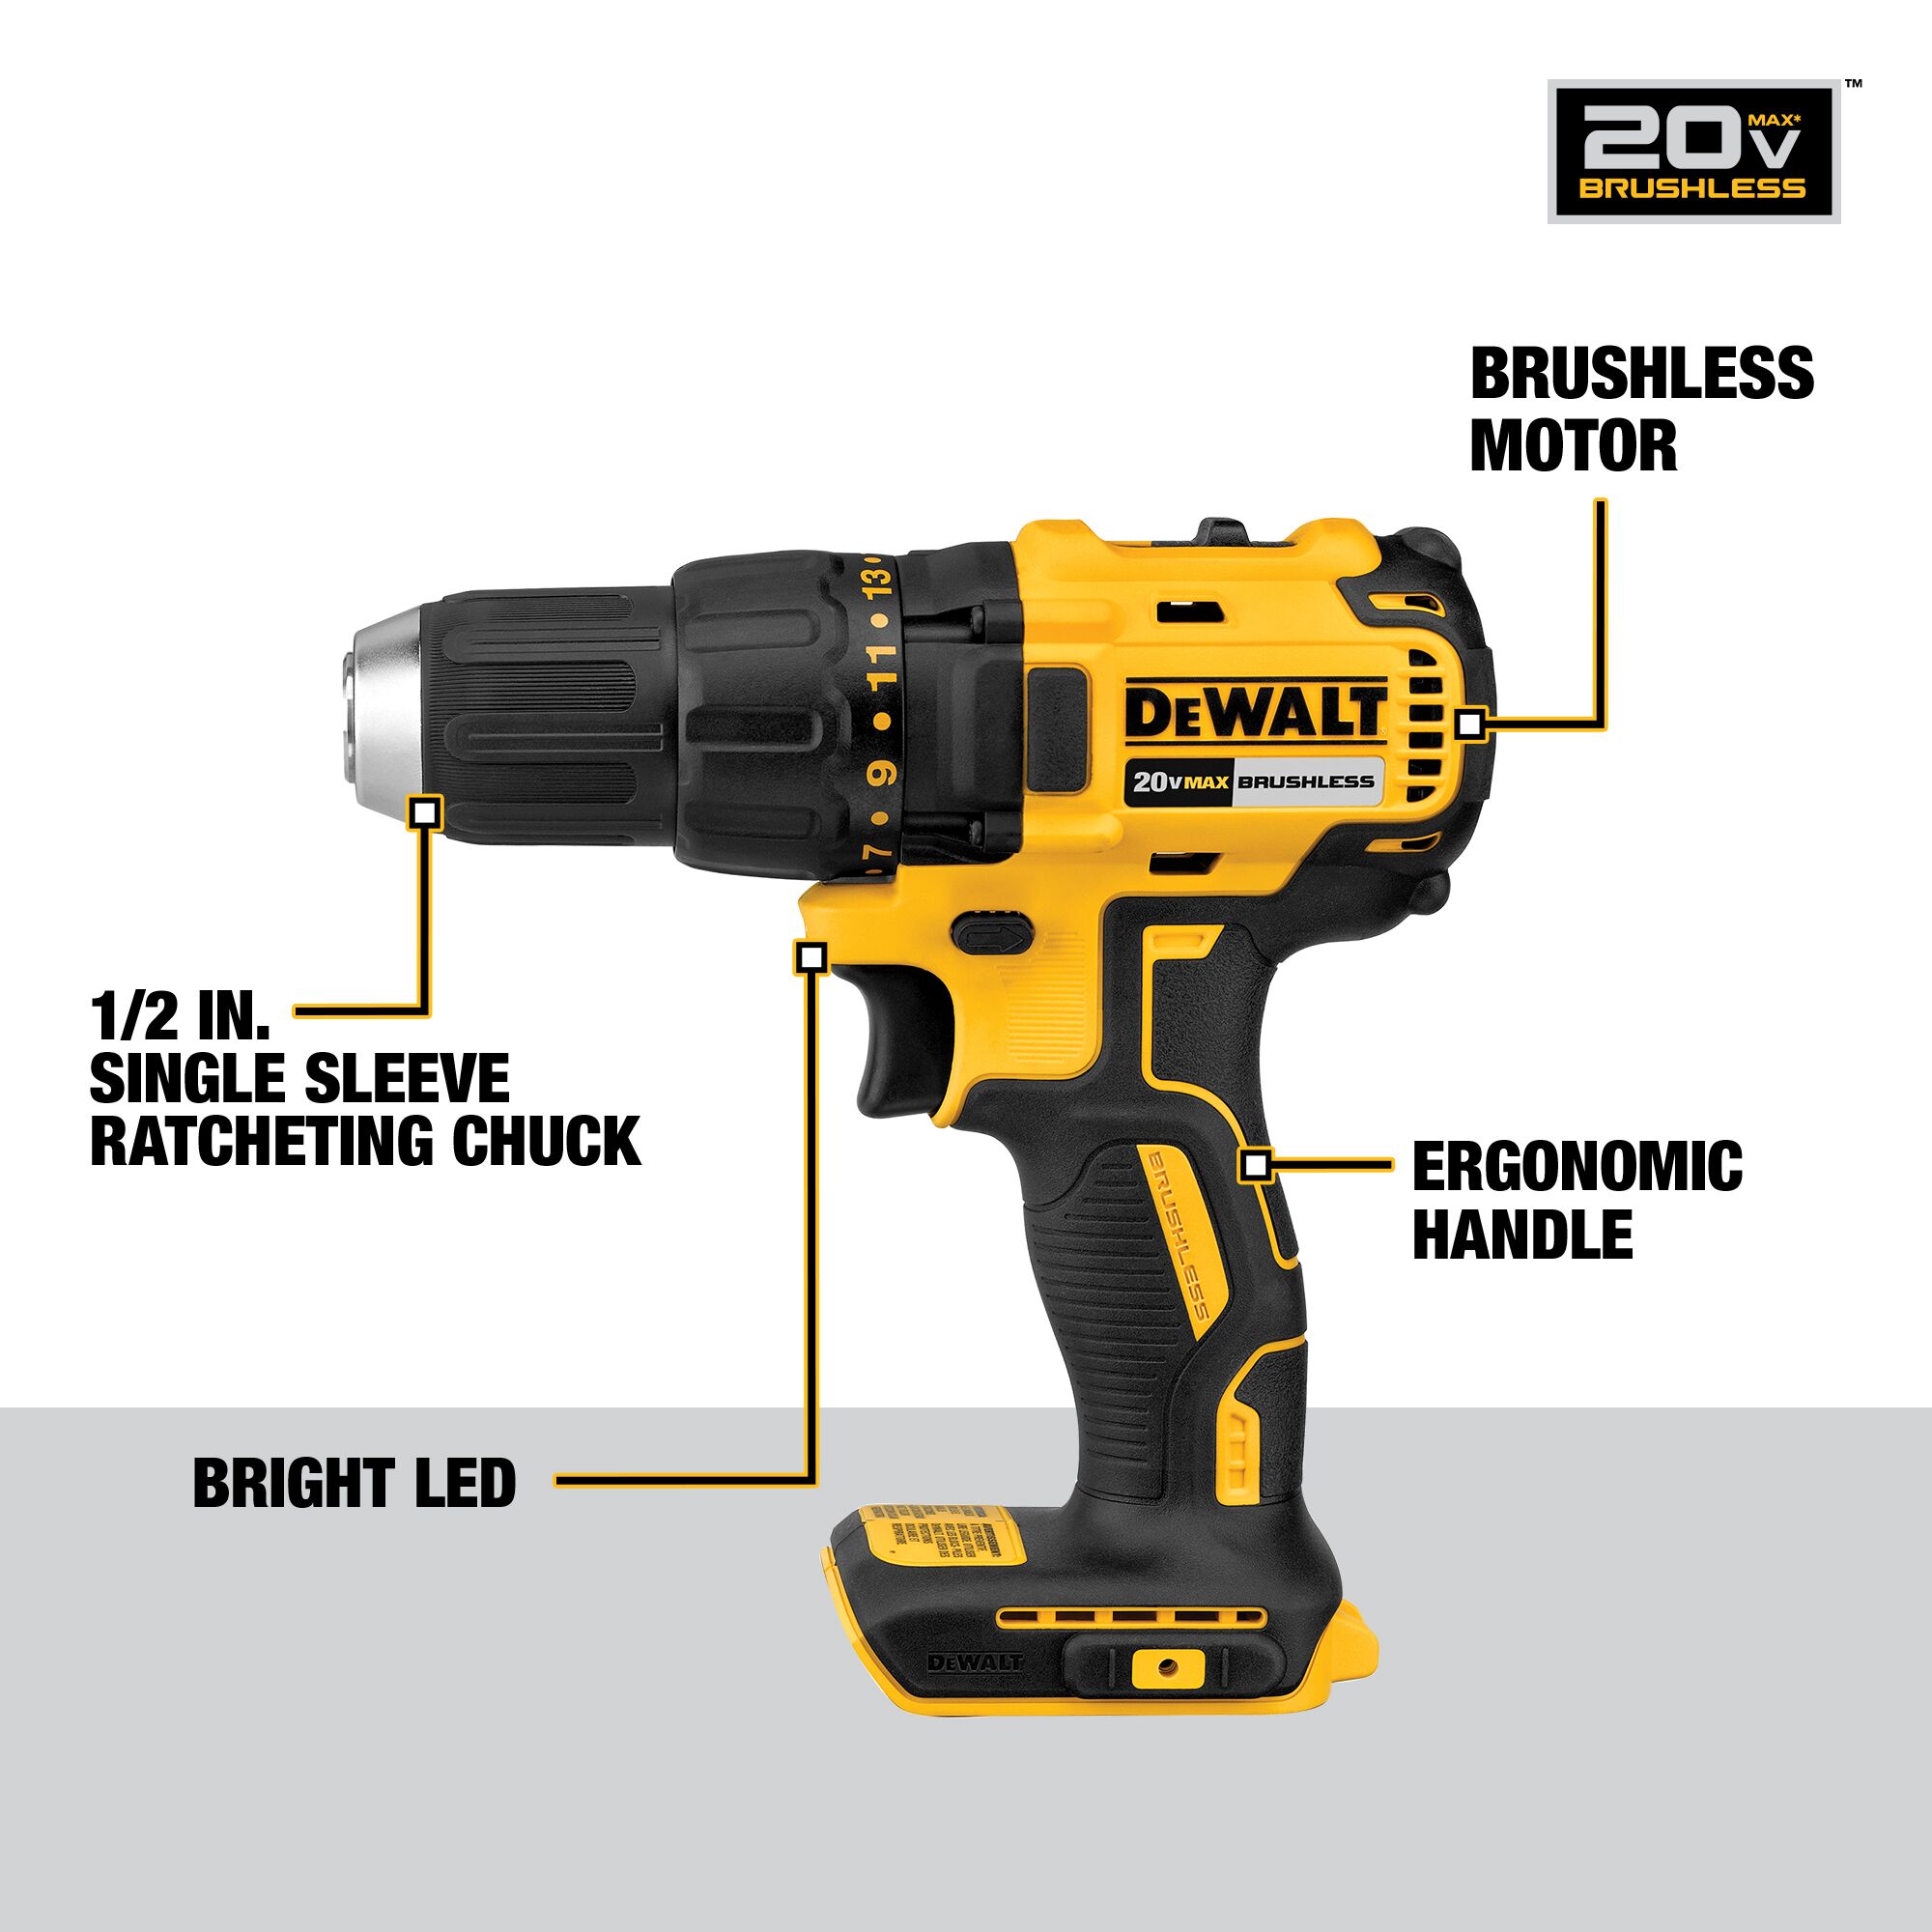 DEWALT 5-Tool 20-Volt Max Brushless Power Tool Combo Kit with Soft